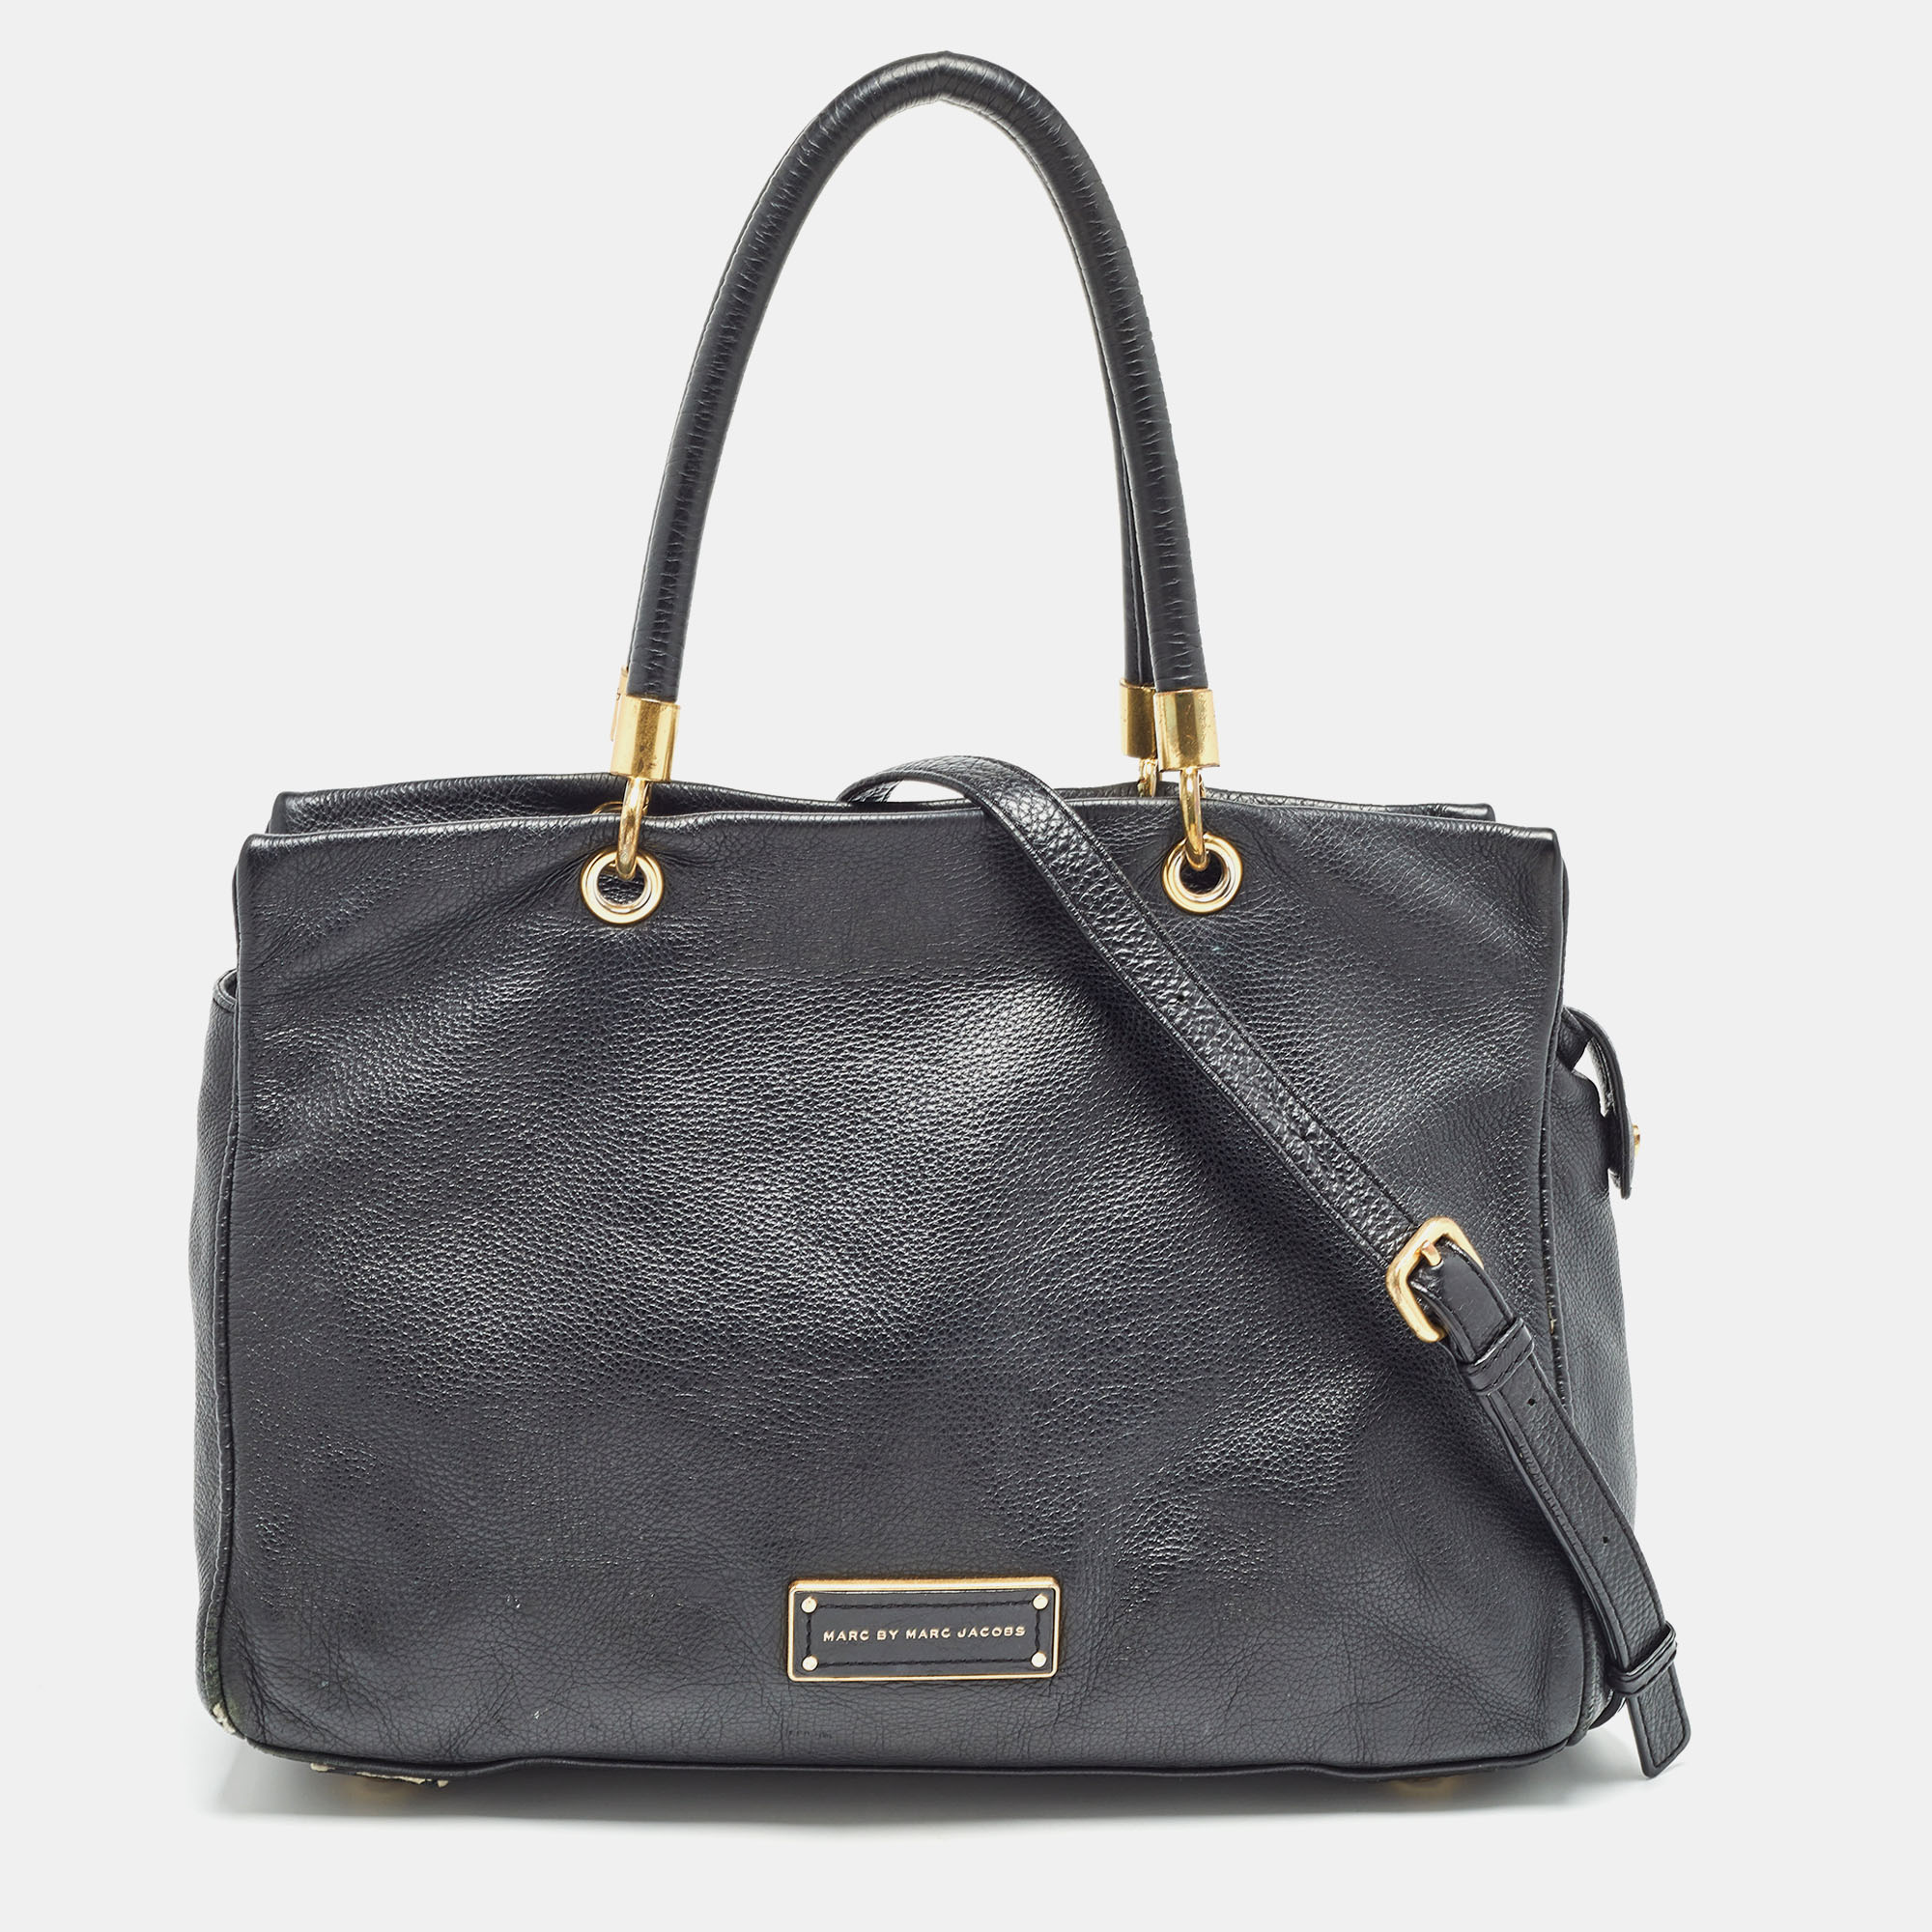 

Marc by Marc Jacobs Black Leather Too Hot to Handle Tote